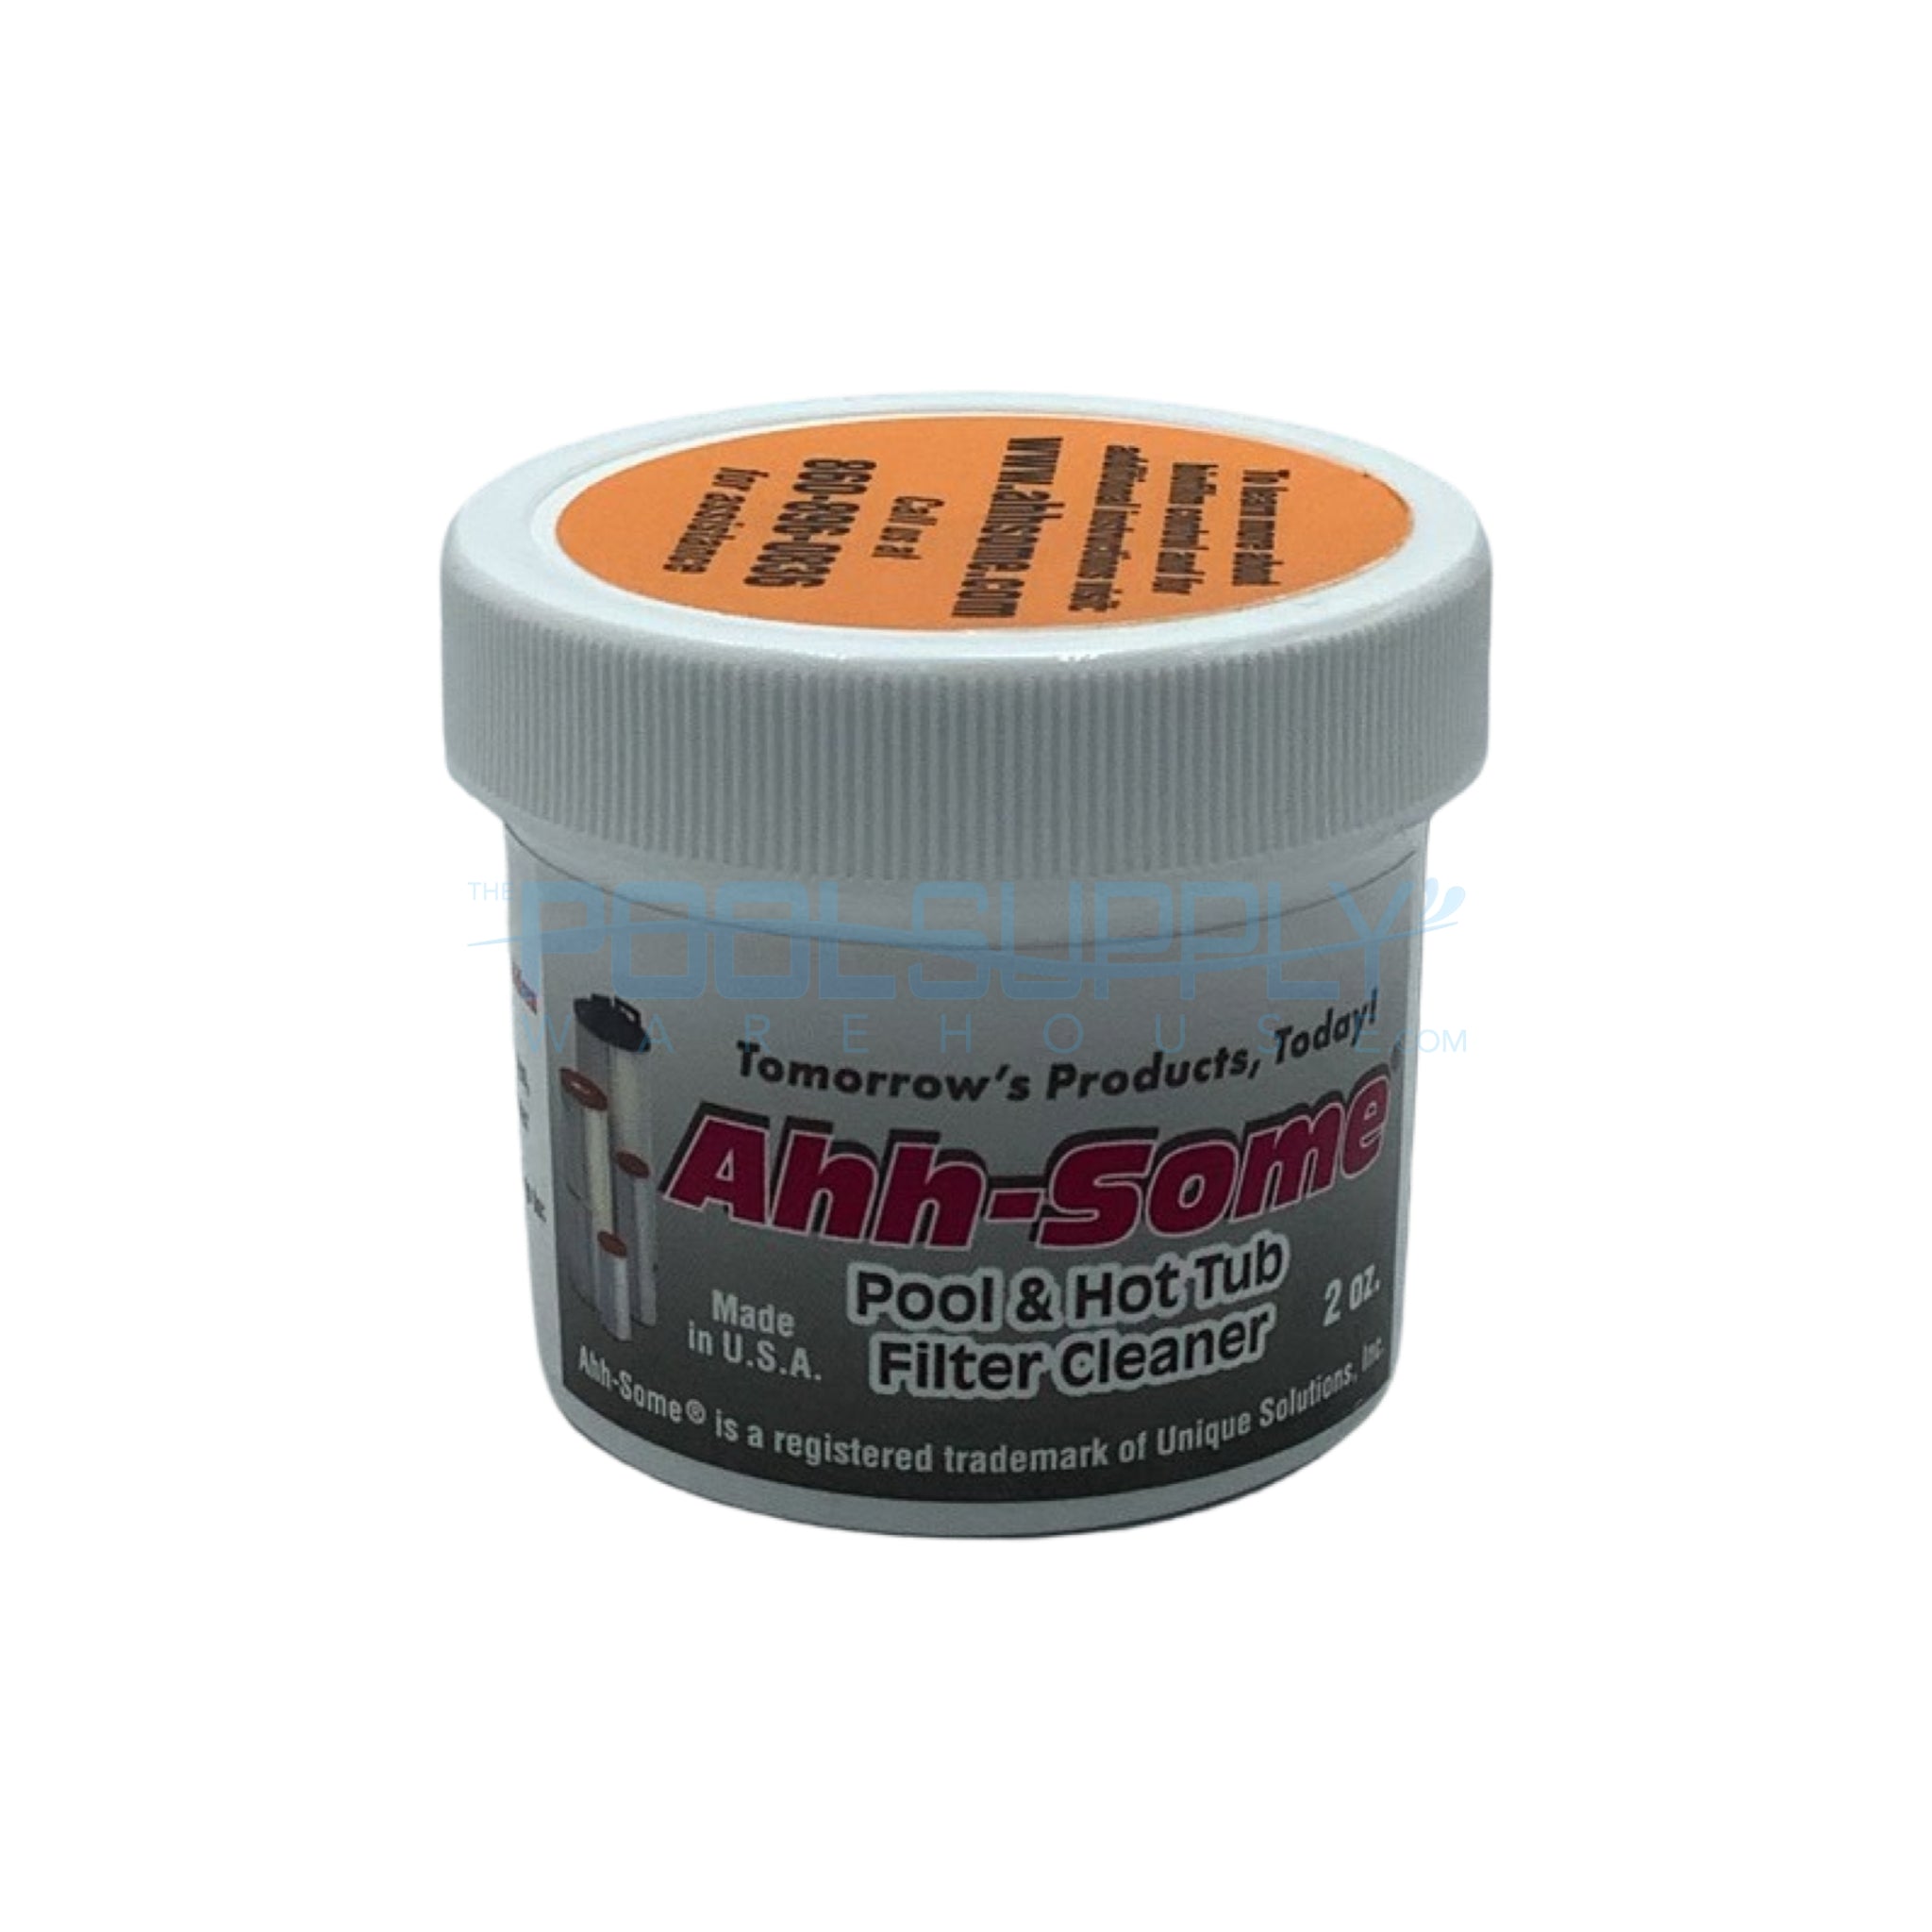 Ahh-Some Pool & Hot Tub Filter Cleaner (2 oz.) - The Pool Supply Warehouse